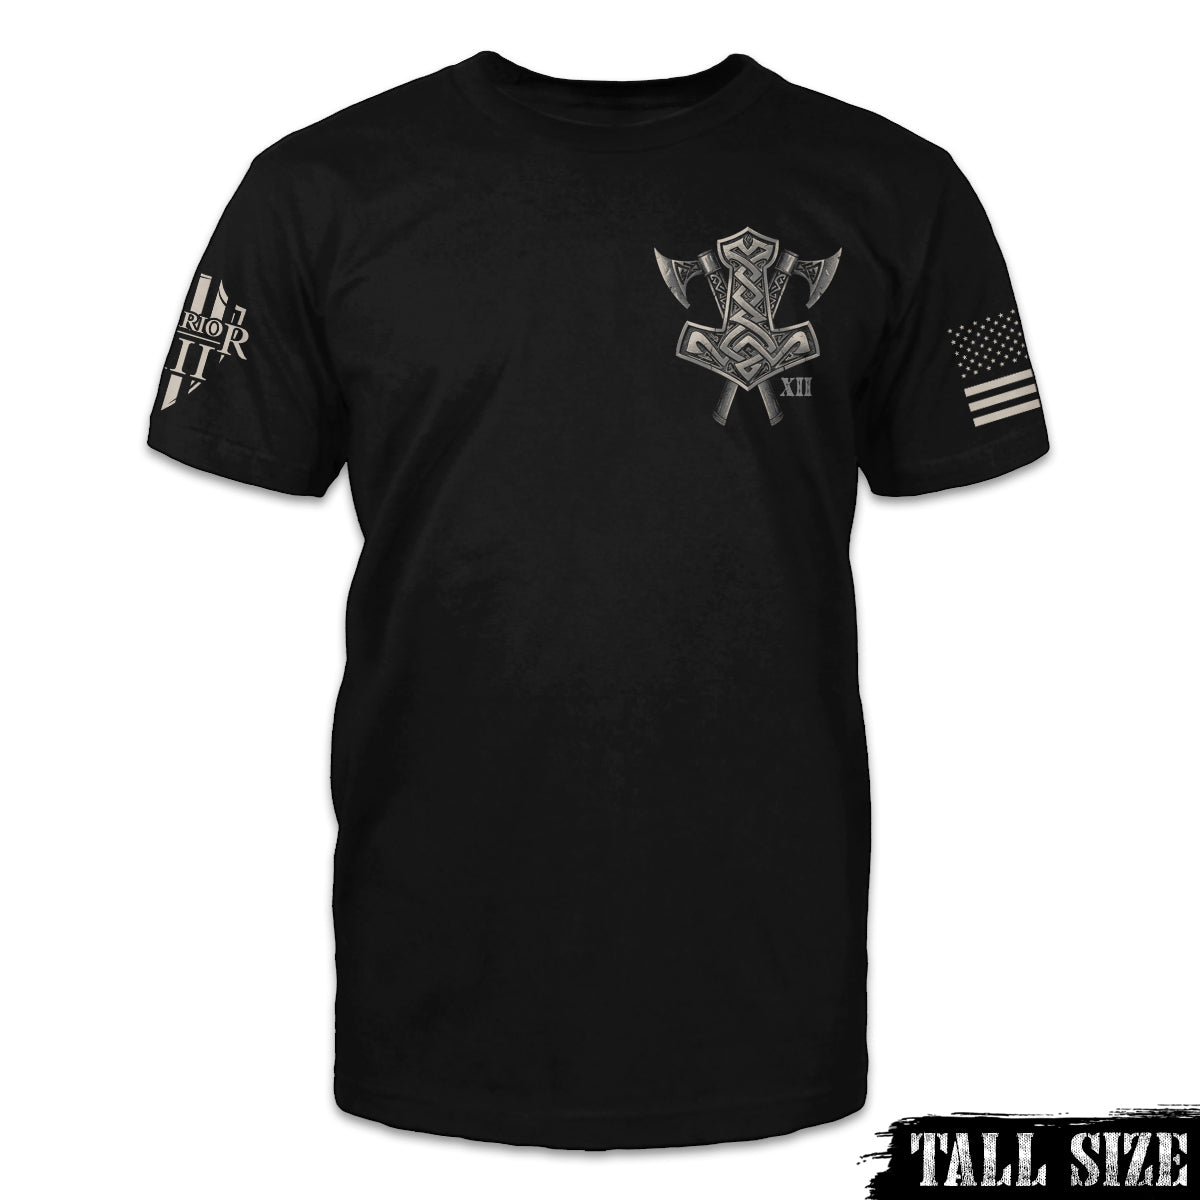 A black tall size shirt with Viking weapons printed on the front left chest.